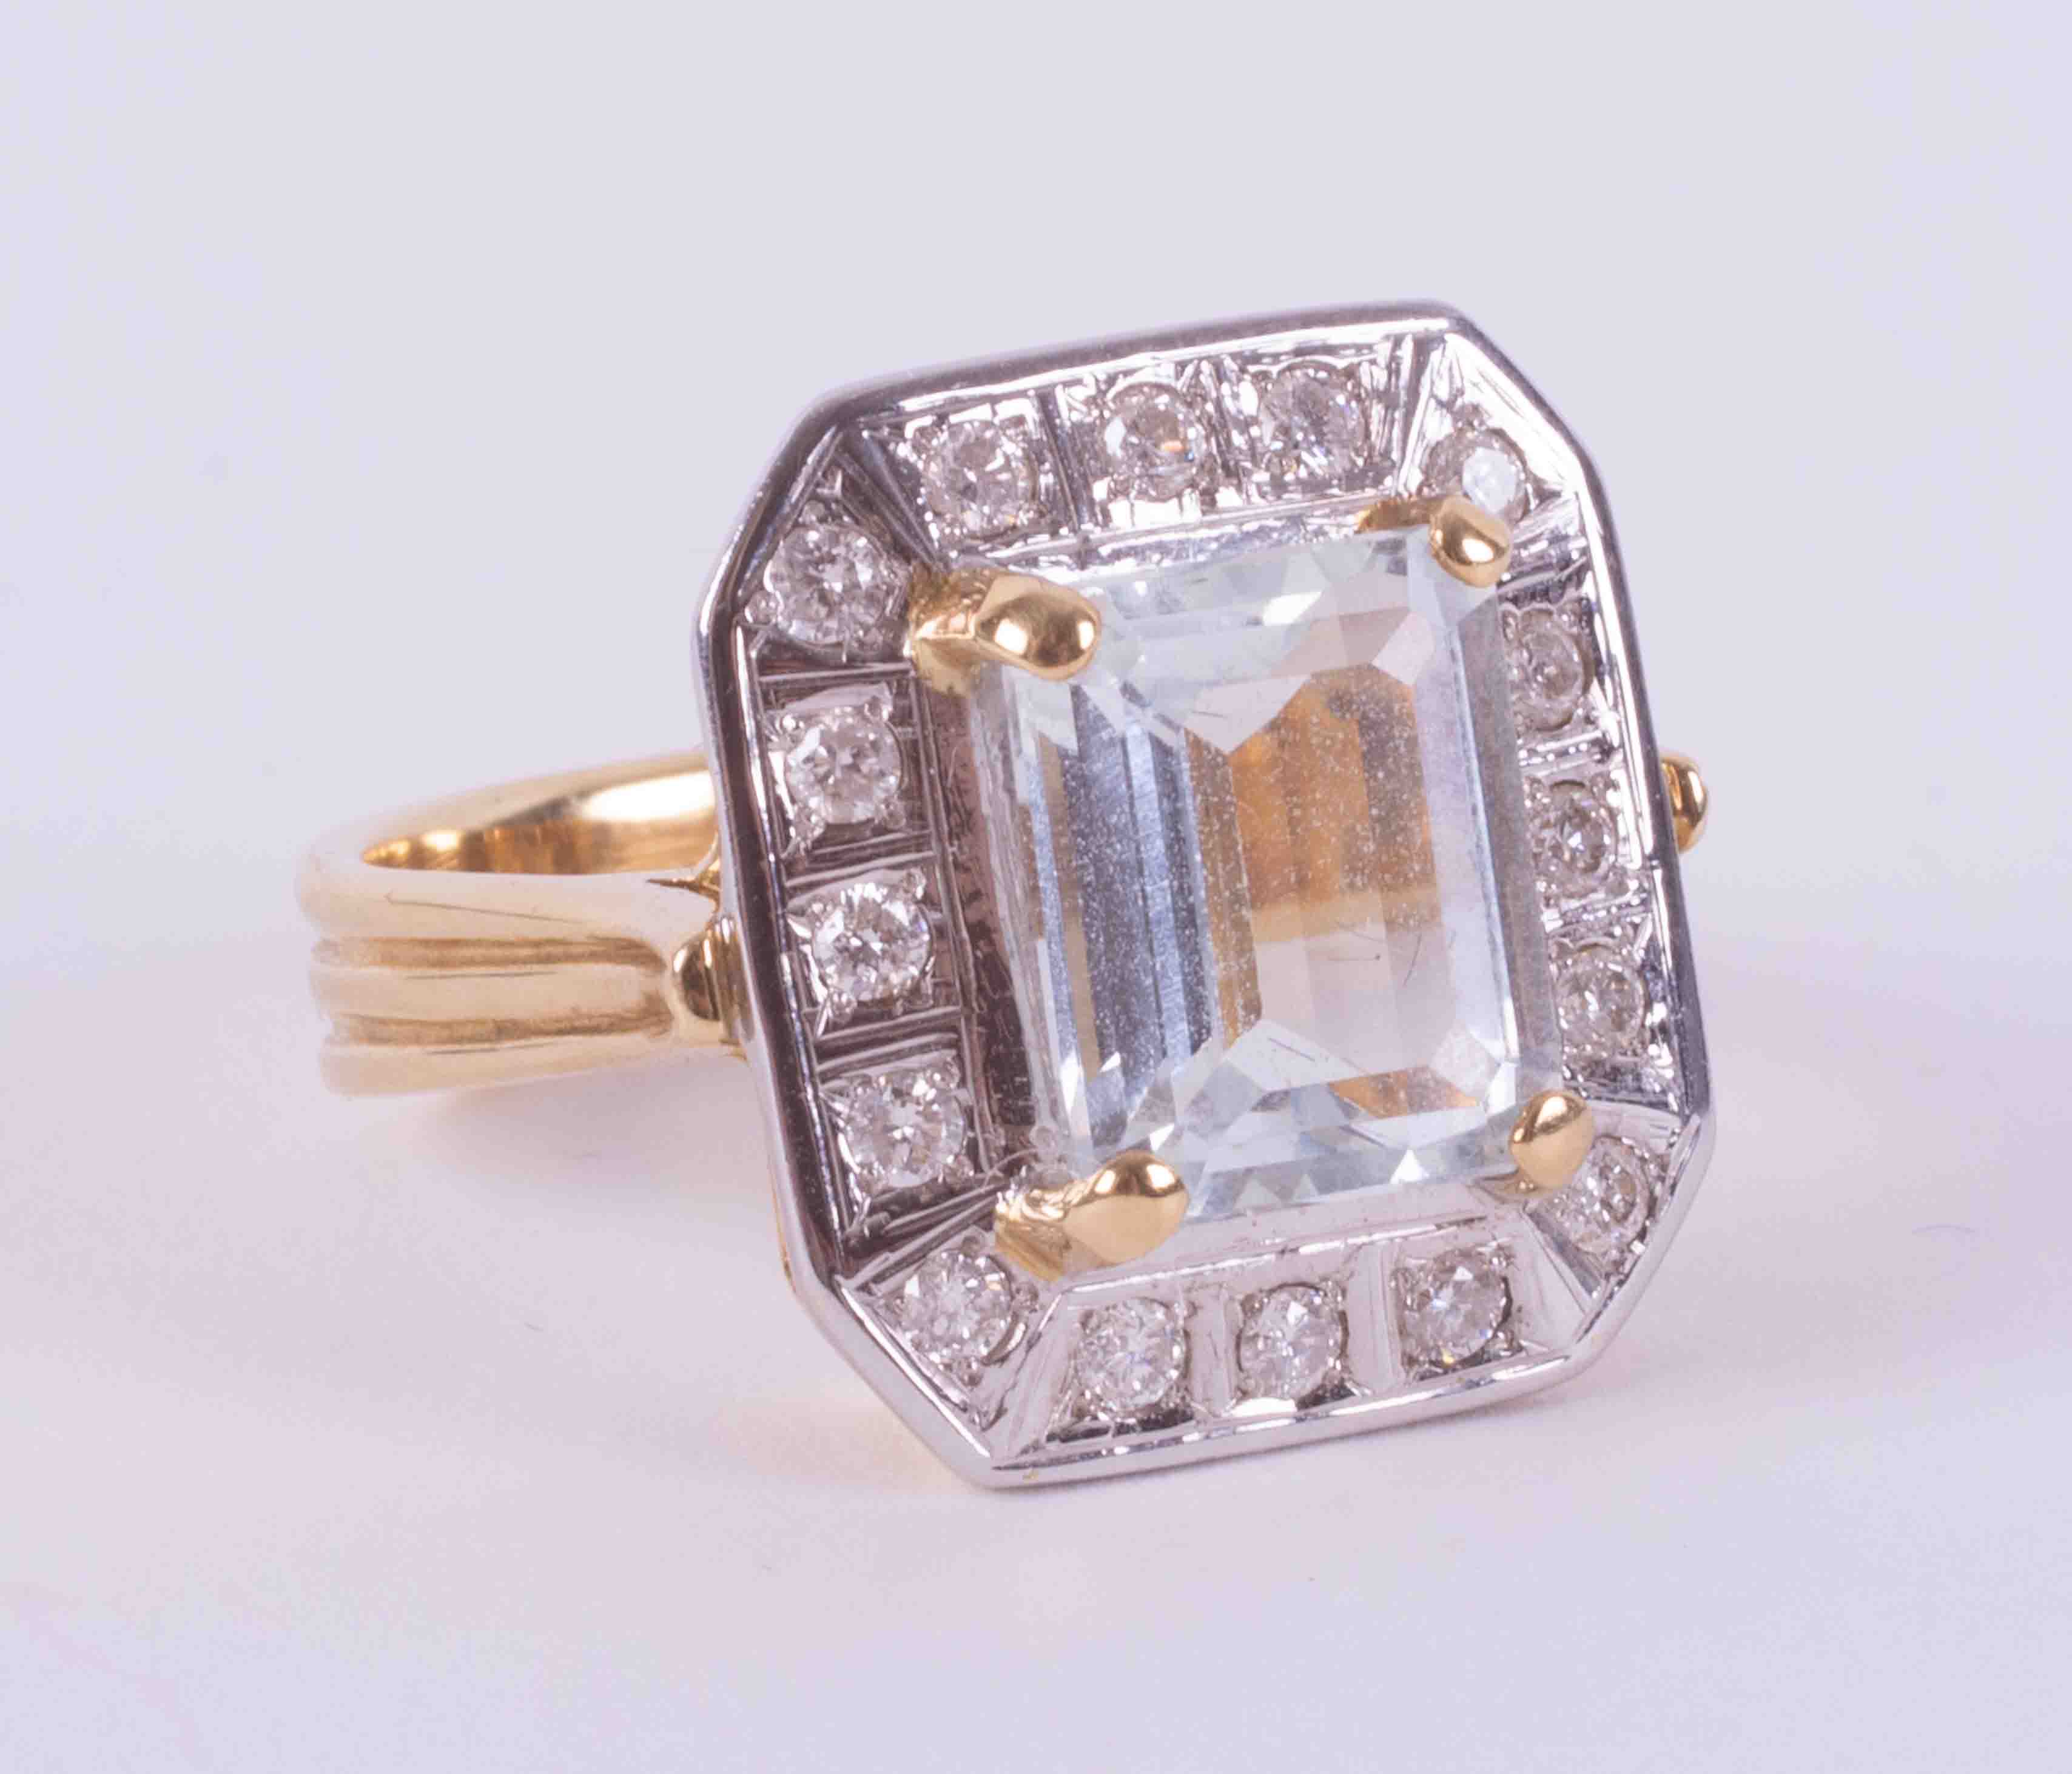 18ct yellow & white gold cluster style ring set with an emerald cut aquamarine, approx. 3.79 carats,